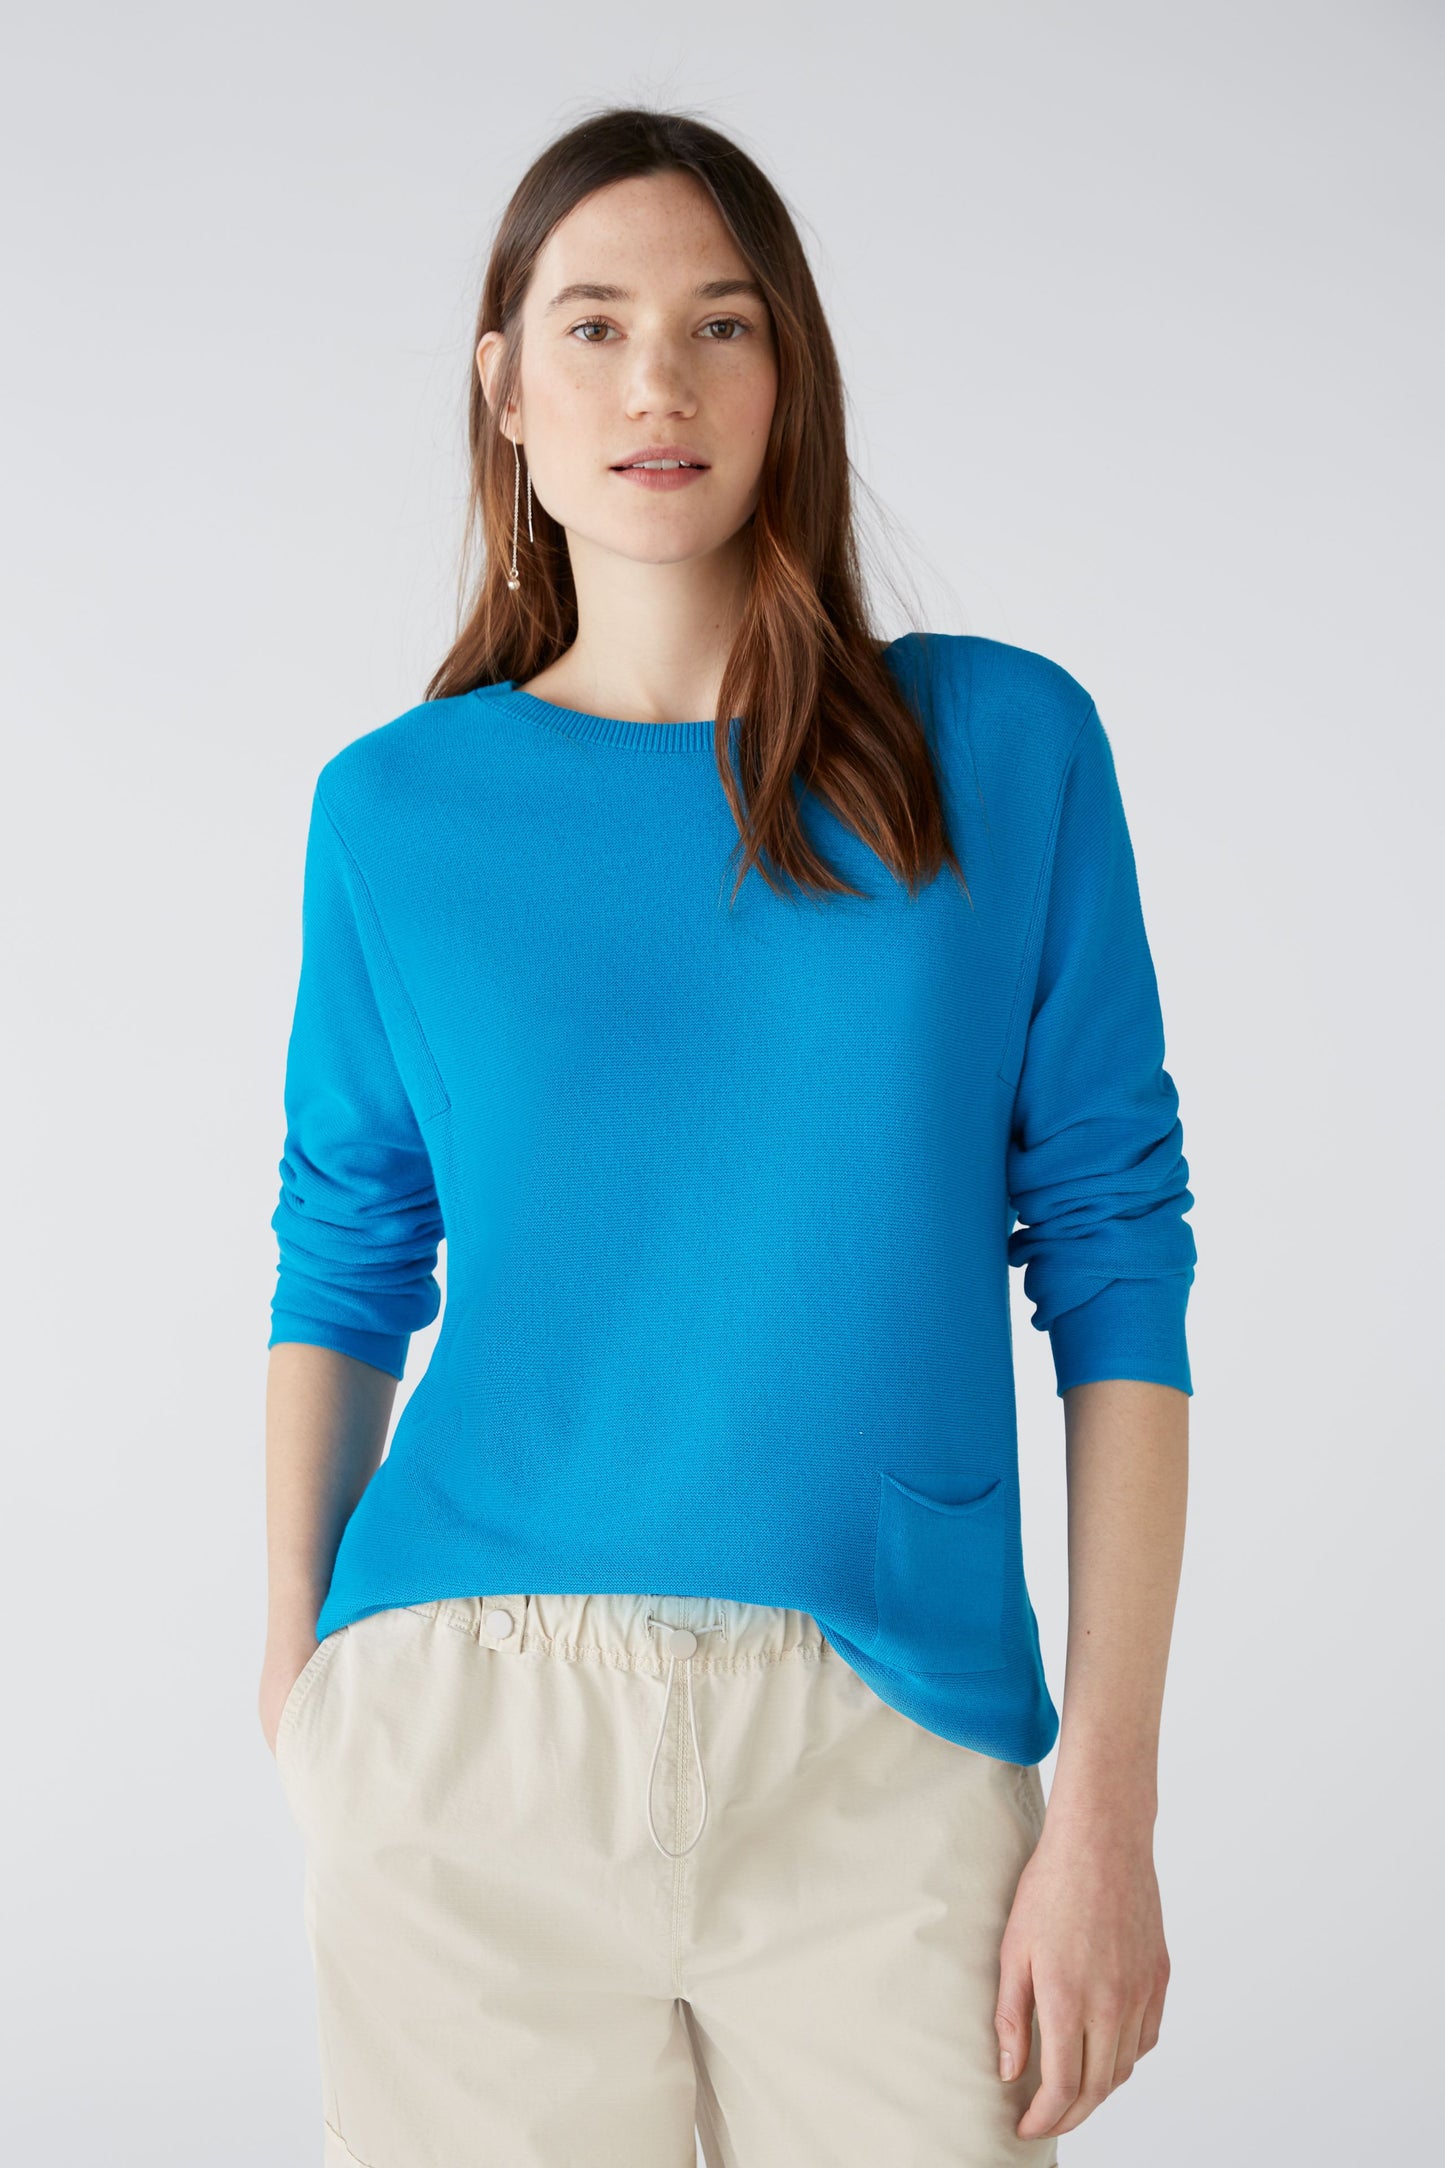 Oui Turquoise Sweater